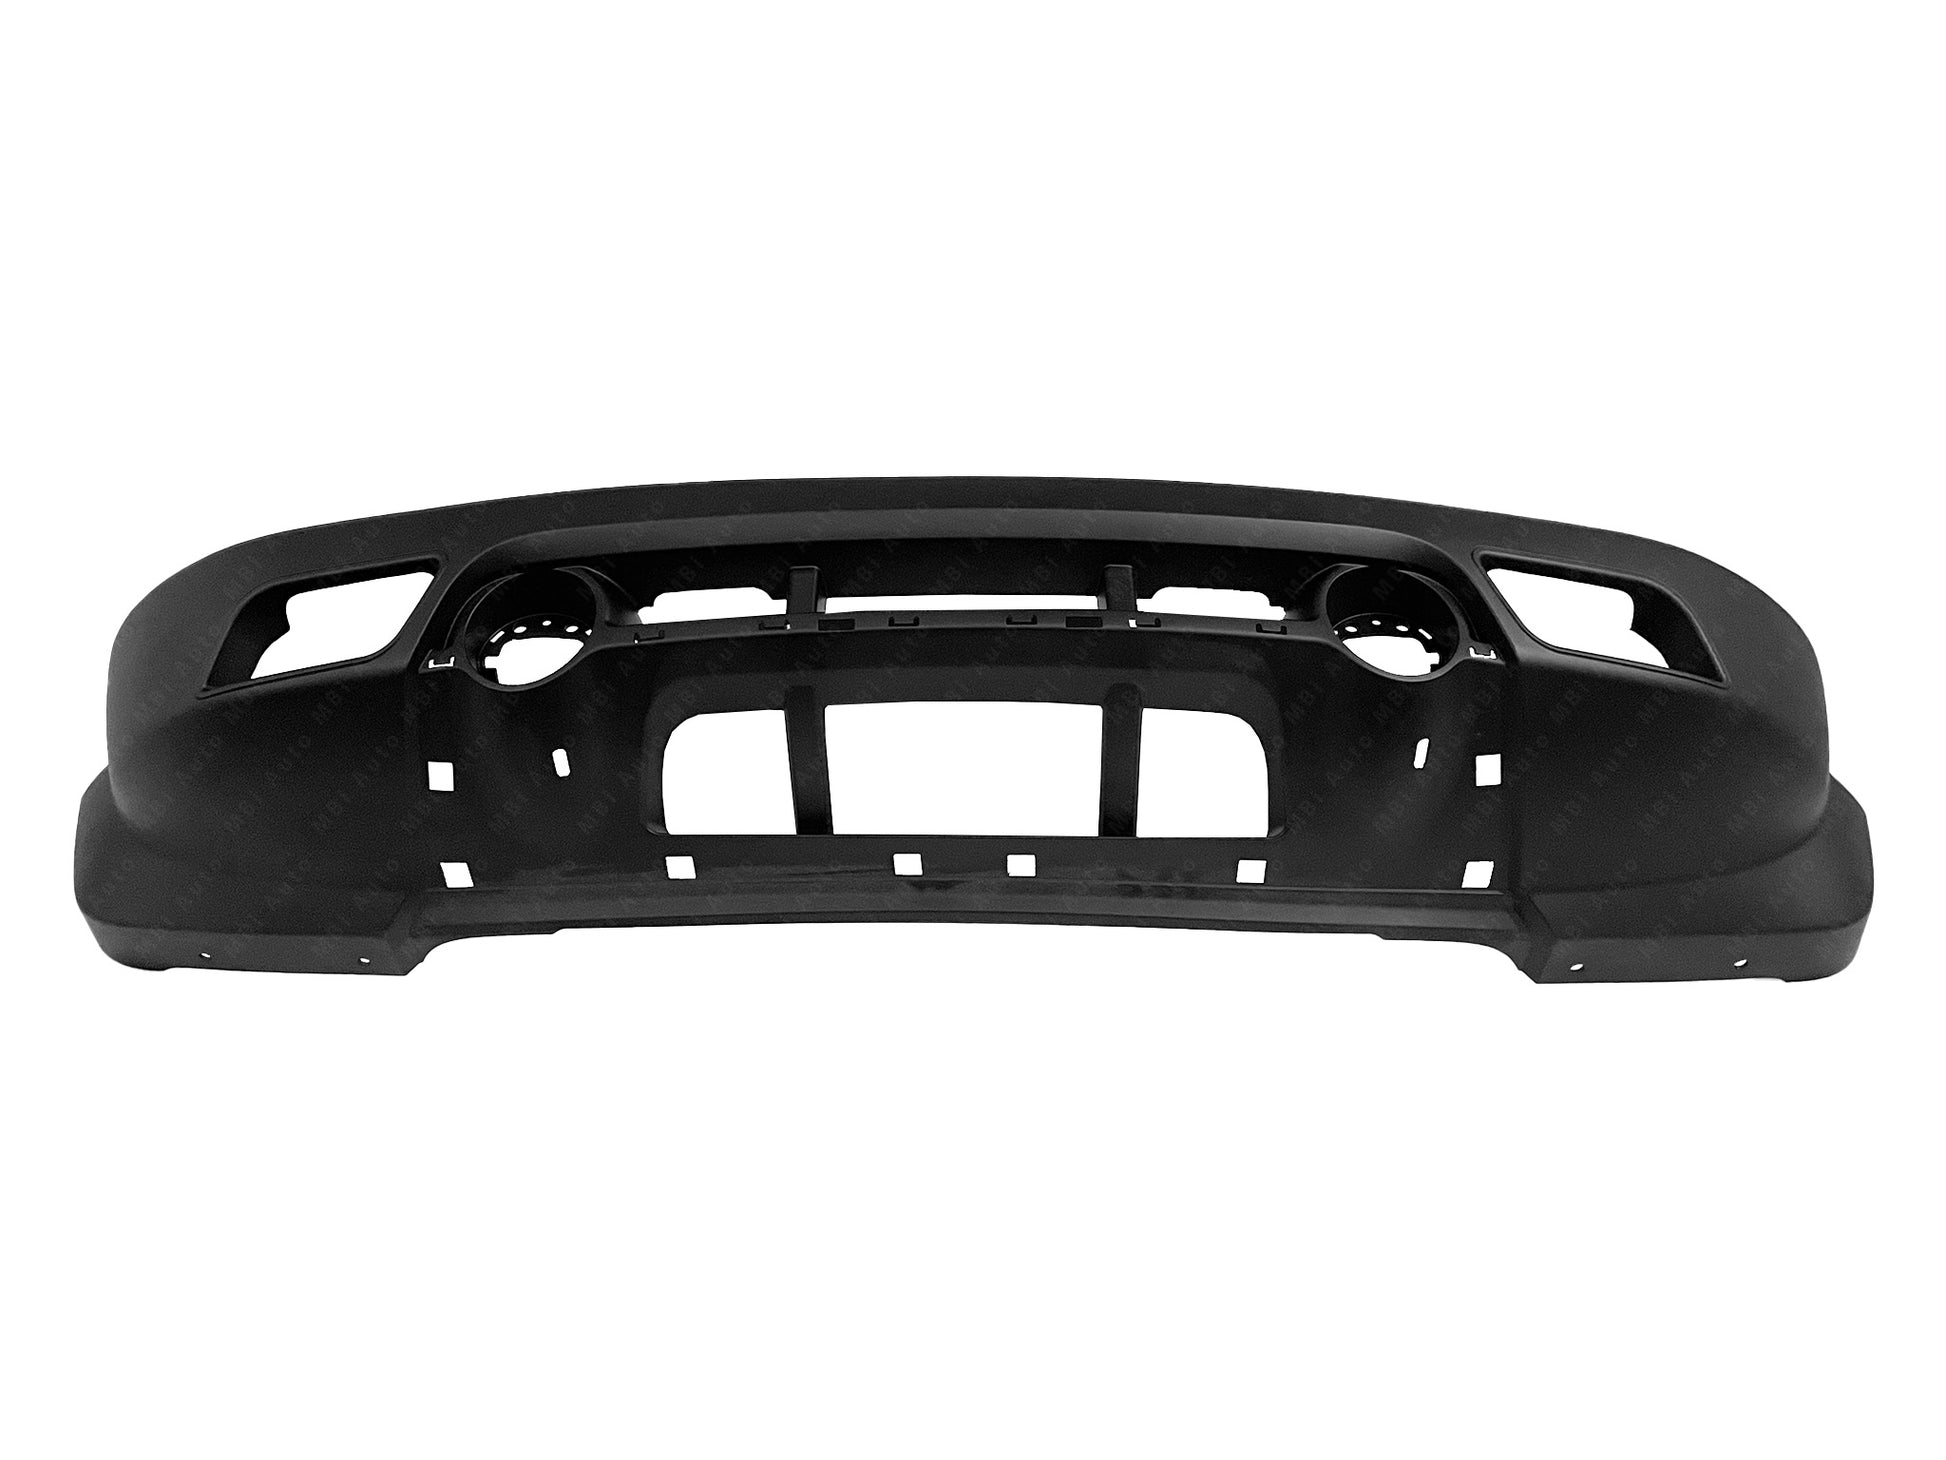 Jeep Patriot 2011 - 2017 Front Textured Lower Bumper Cover 11 - 17 CH1015112 Bumper-King